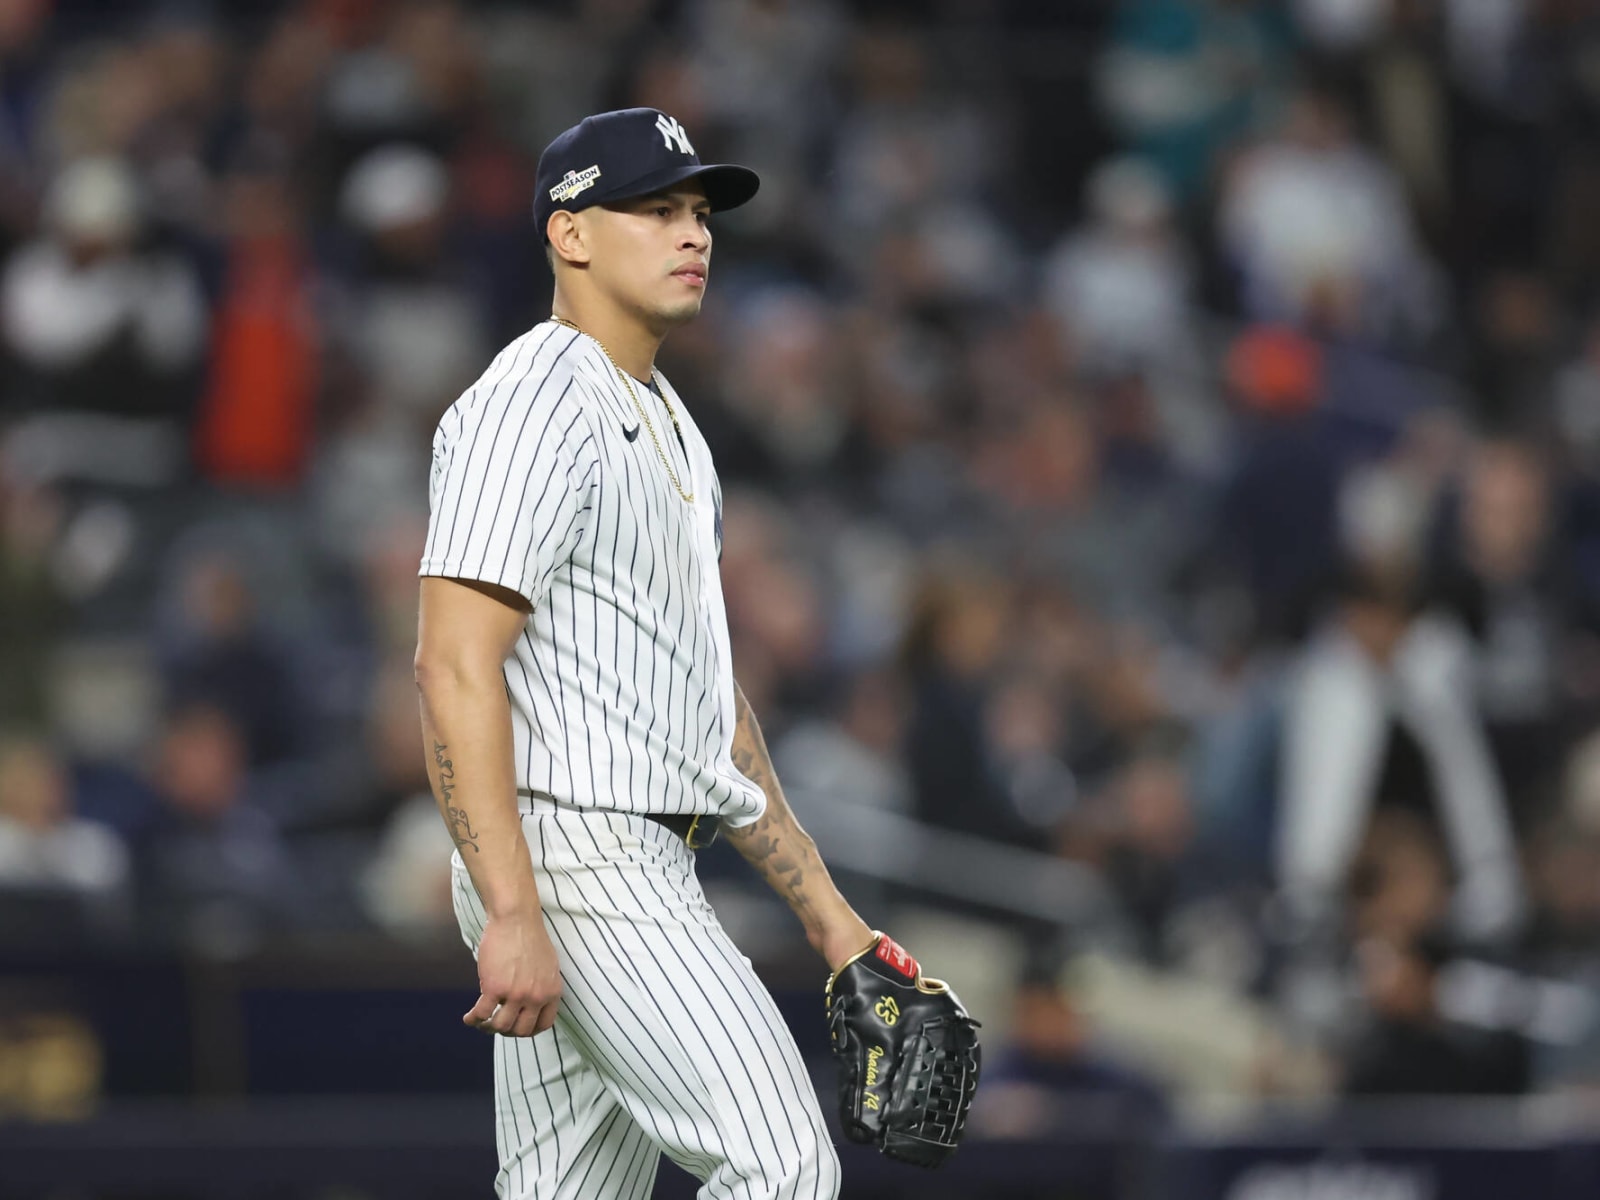 Yankees place Loaisiga on IL with elbow inflammation